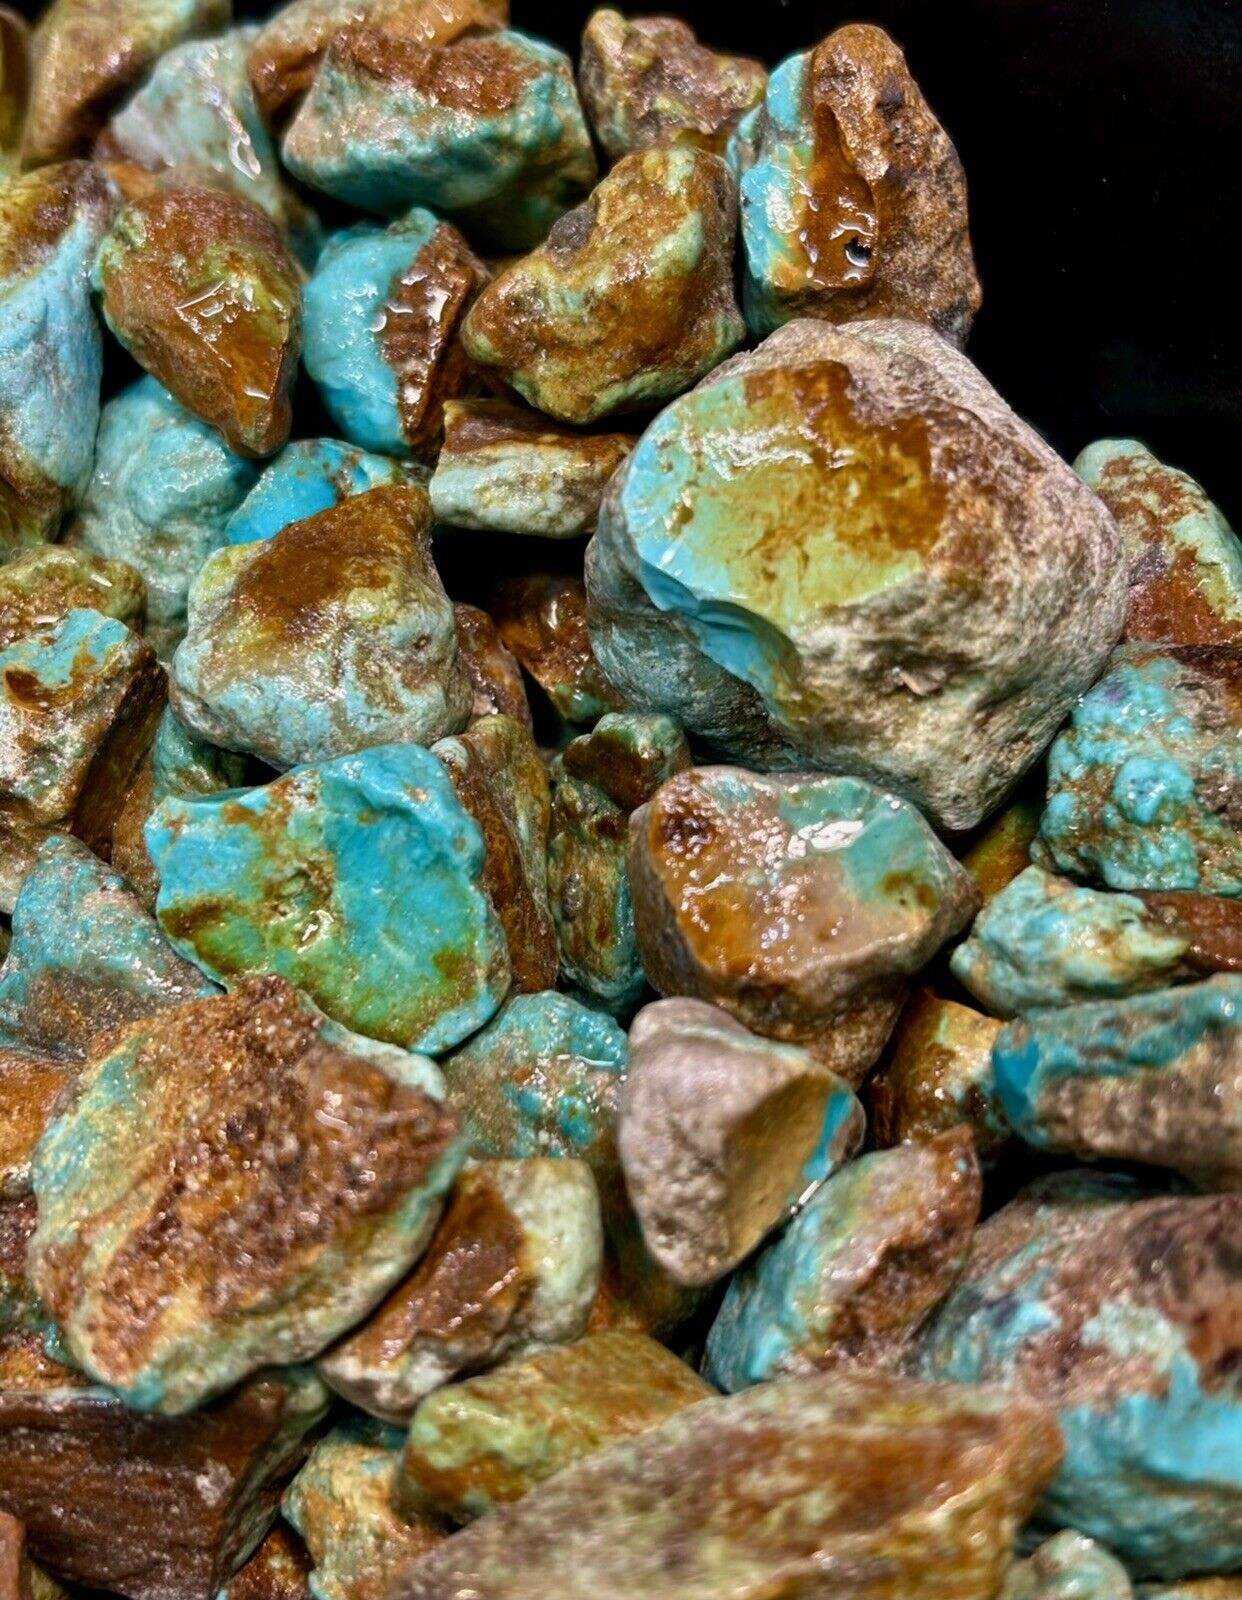 Turquoise Mountain Classic Blue turquoise. 1 Pound. Rusty matrix. Almost gone.